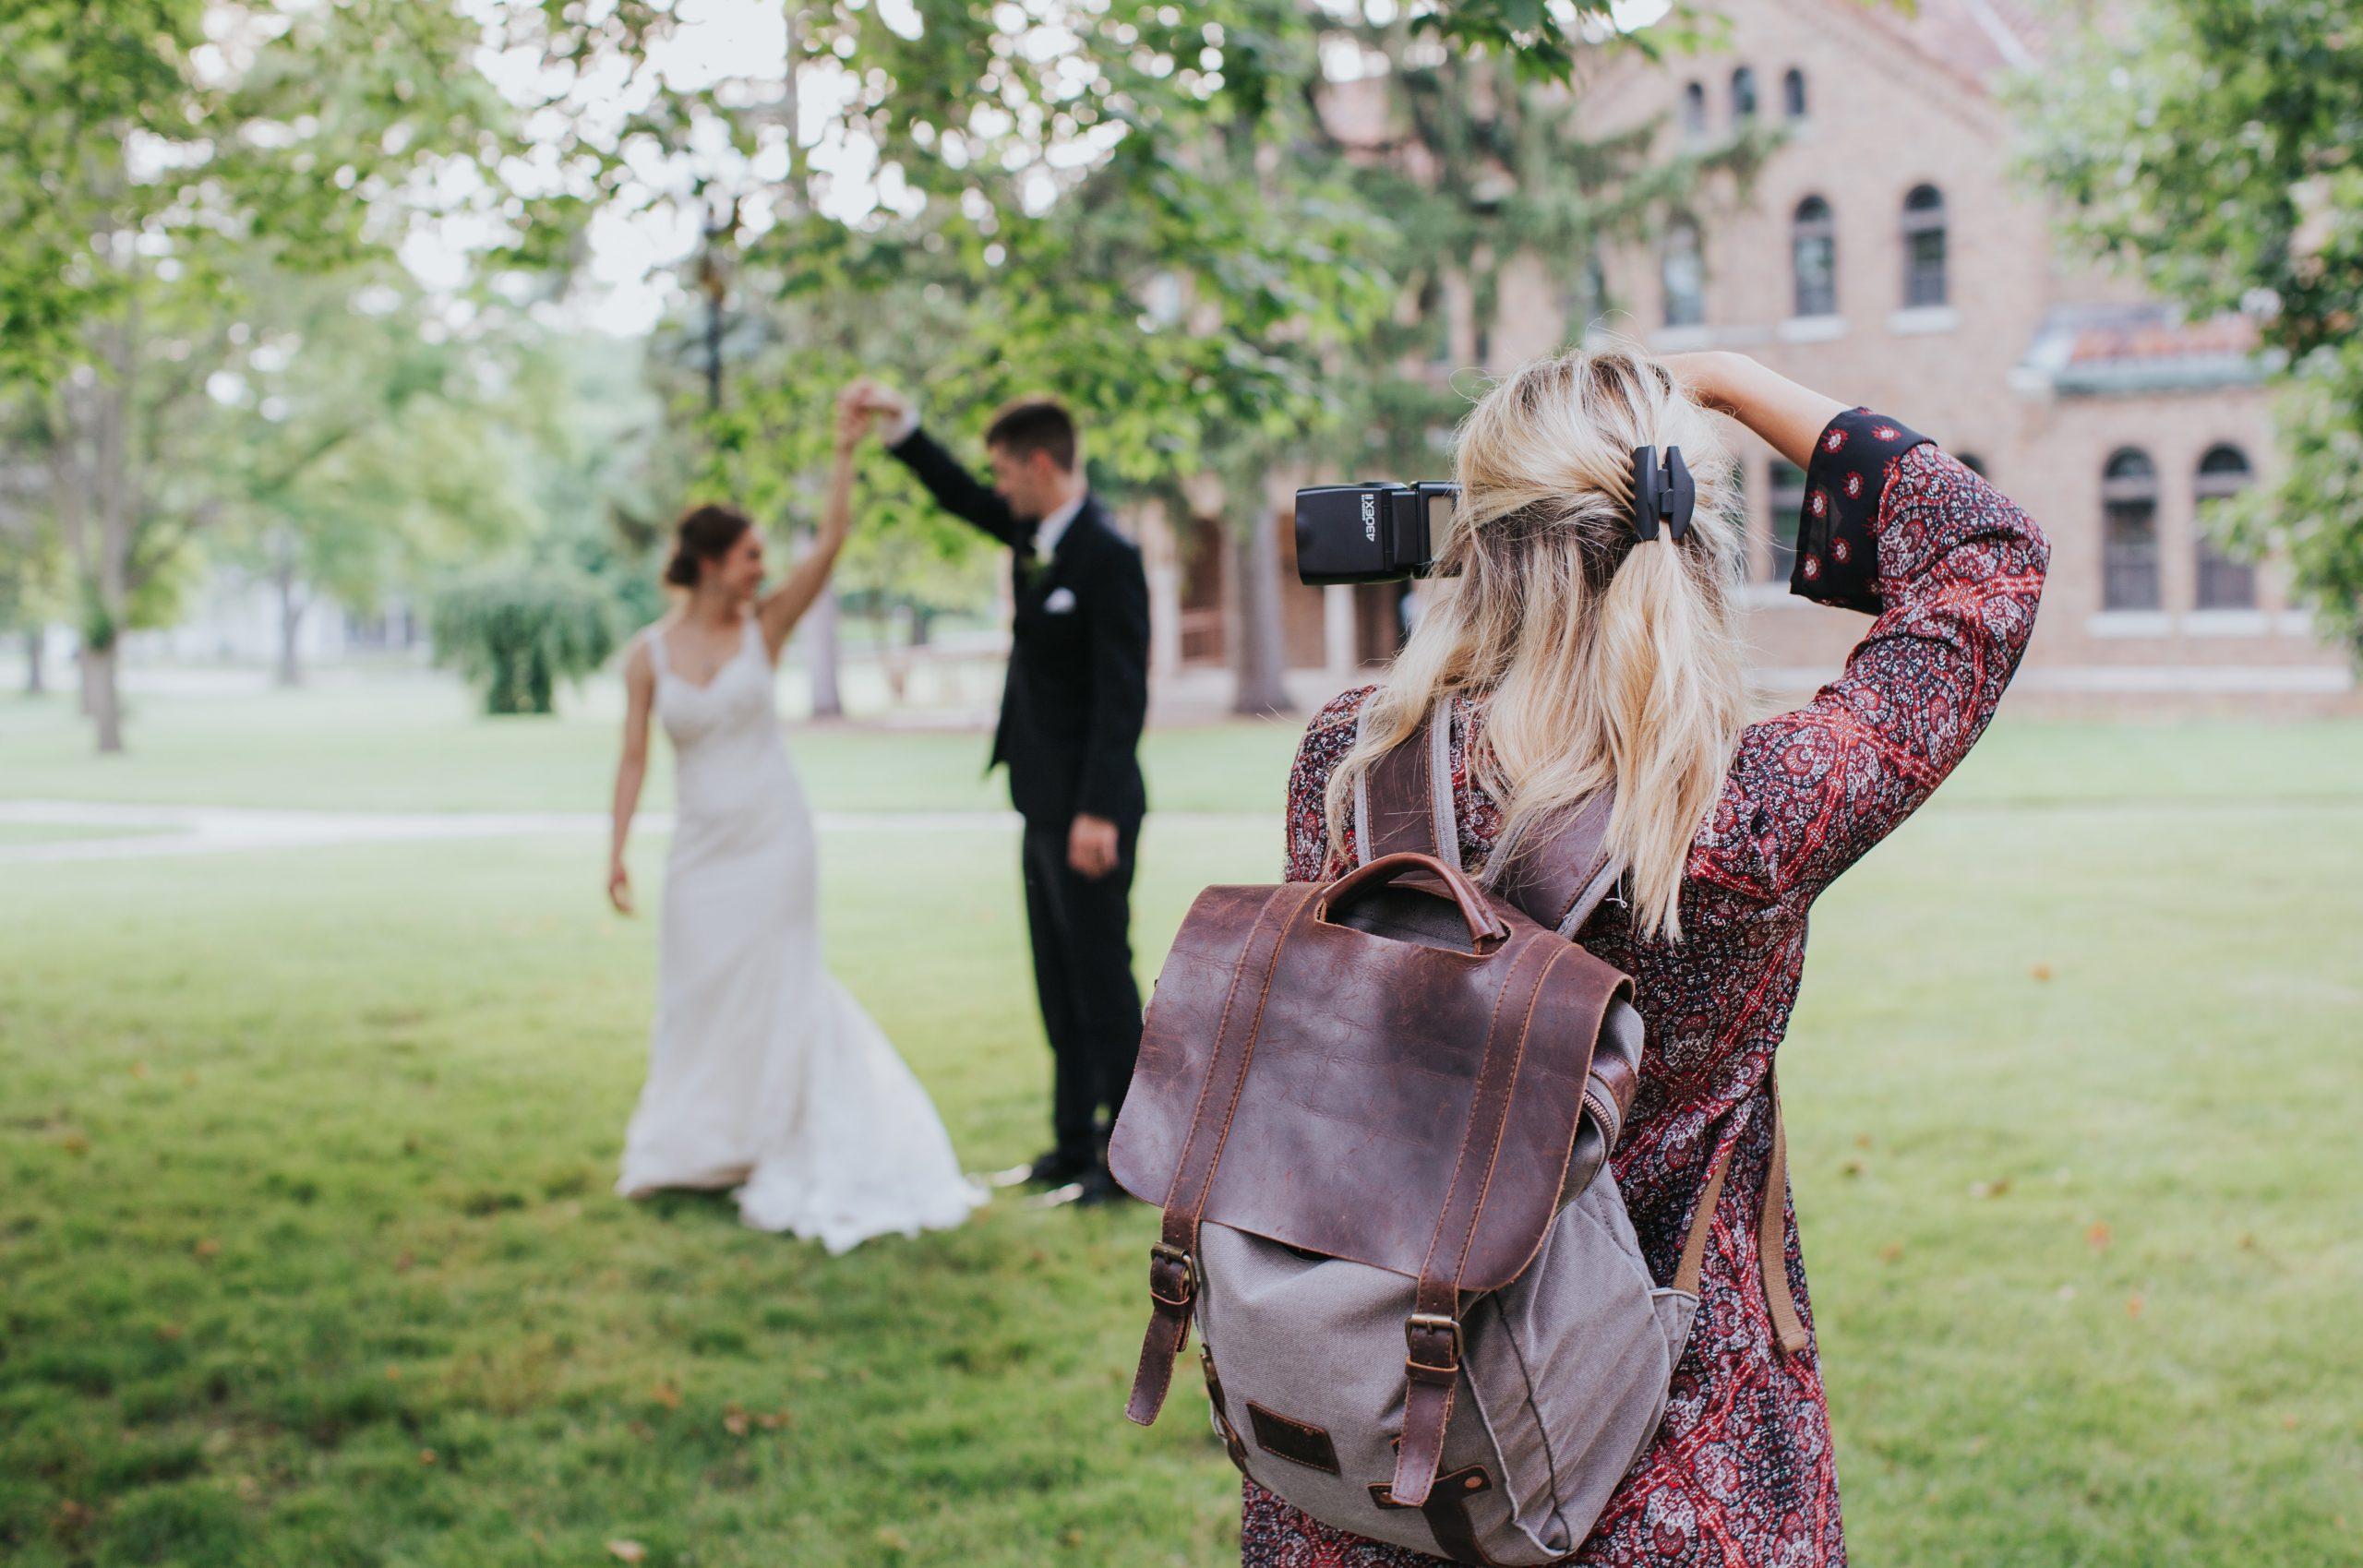 Check out the link for some creative and trendy wedding photography styles that every professional wedding photographer should be aware of!